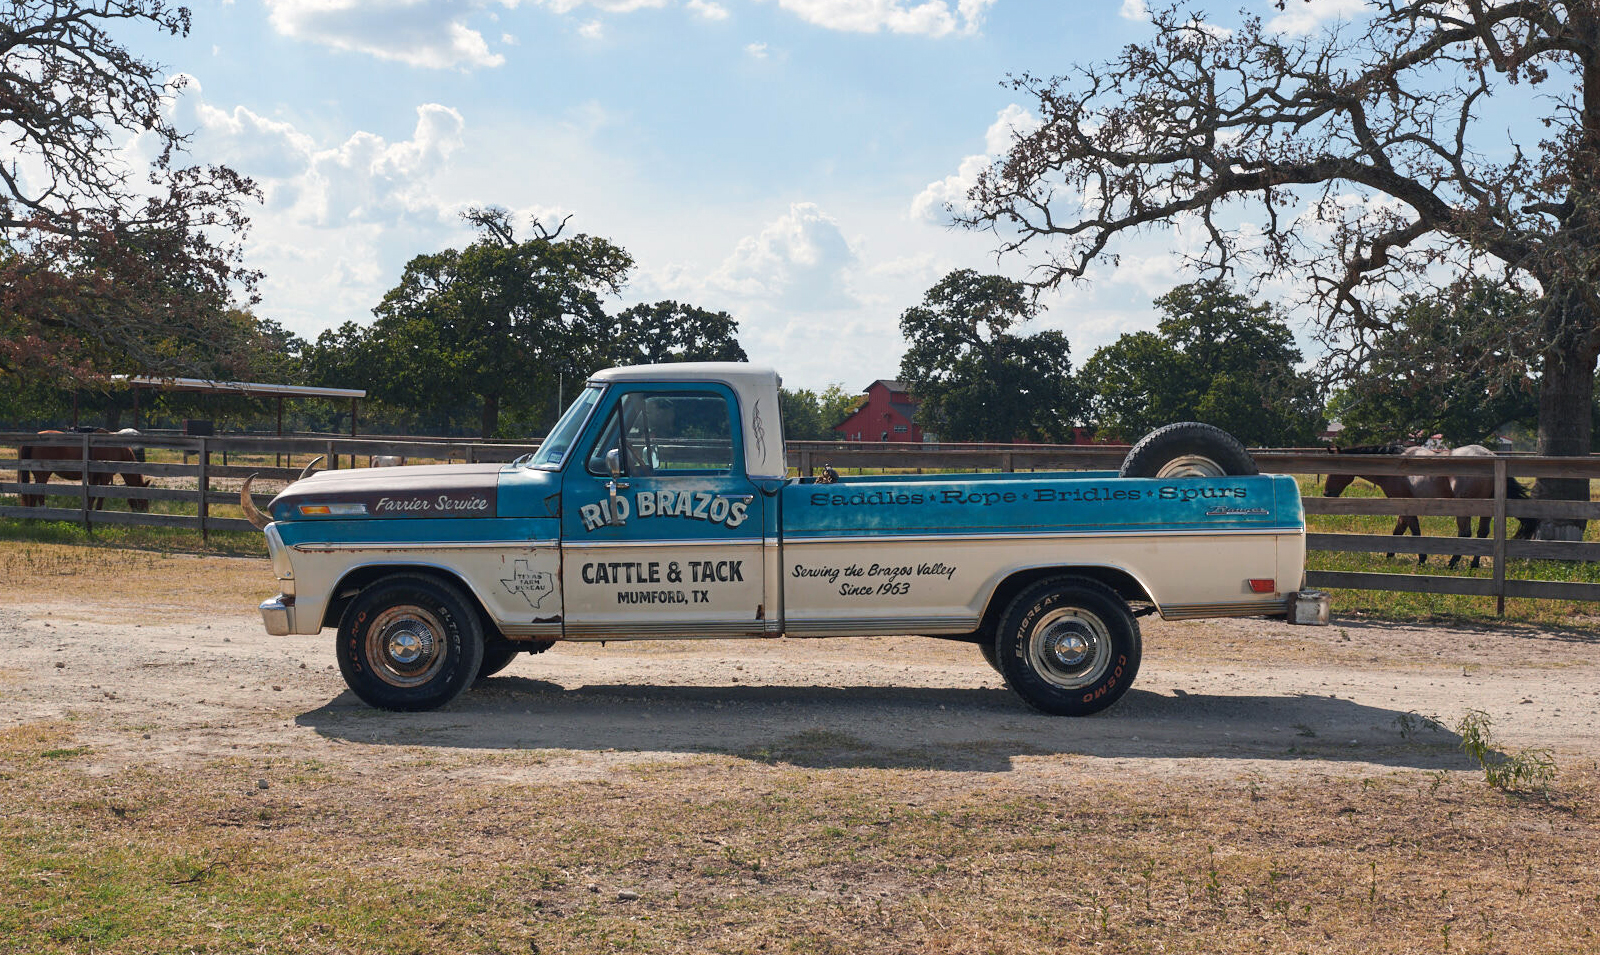 1969 Ford F100 Ranch Truck with custom restomod lettering